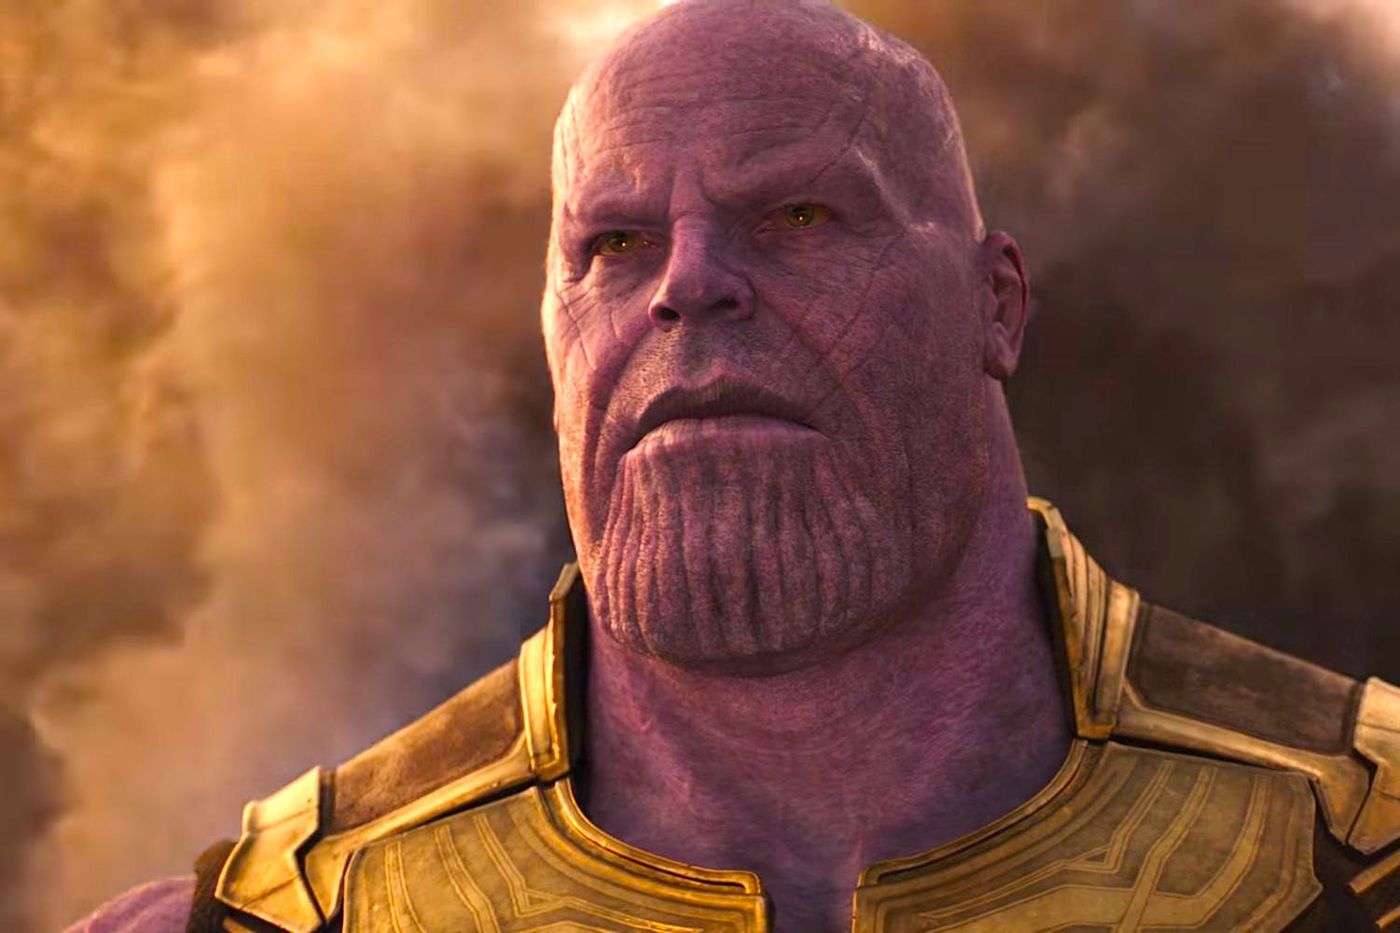 “Thanos destroying the stones in Endgame makes ZERO sense, because his logic was that “he did it so that his 50/50 snap can’t be undone by anyone”, but the universe’s population will normalize to the previous amount in just a century or so (which is NOTHING to thanos, considering he is over 1500 years old). Fun fact: Earth’s population in 1920 was 1.9bil. Today (100 years later), it’s over 7bil. So snapping earth’s population to 50% would normalize back to over 7bil in less than 50years.”